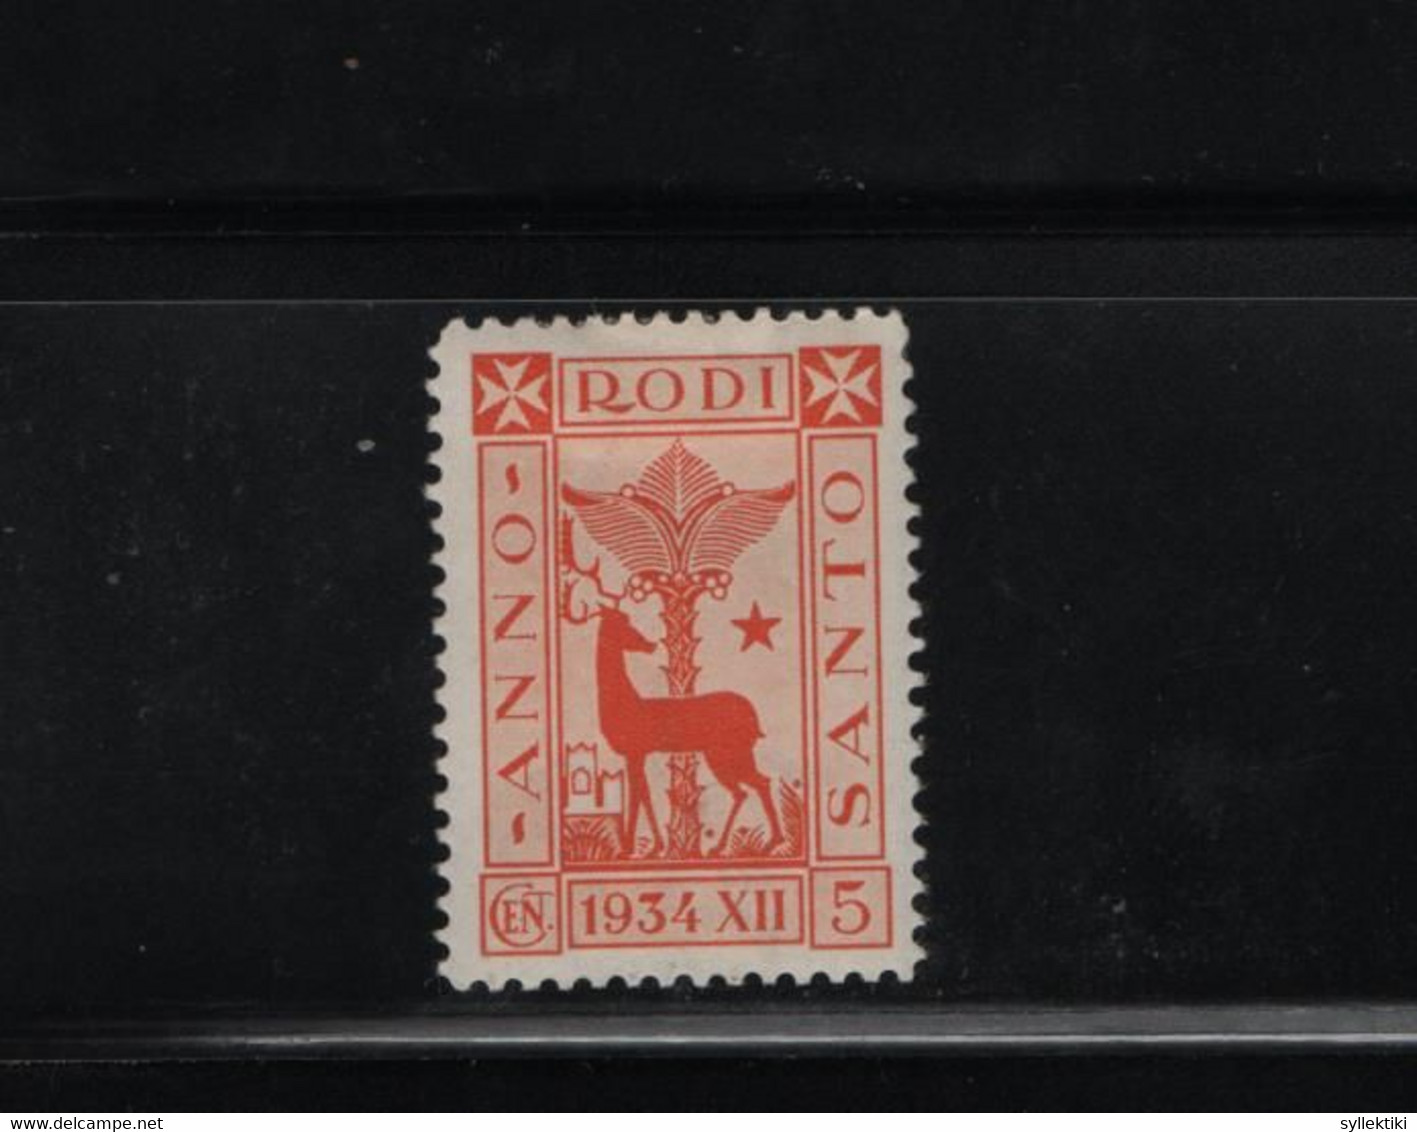 GREECE DODECANESE 1935 HOLY YEAR ISSUE 5 CENT MH STAMP    HELLAS No 144 AND VALUE EURO 25.00 - Dodekanesos